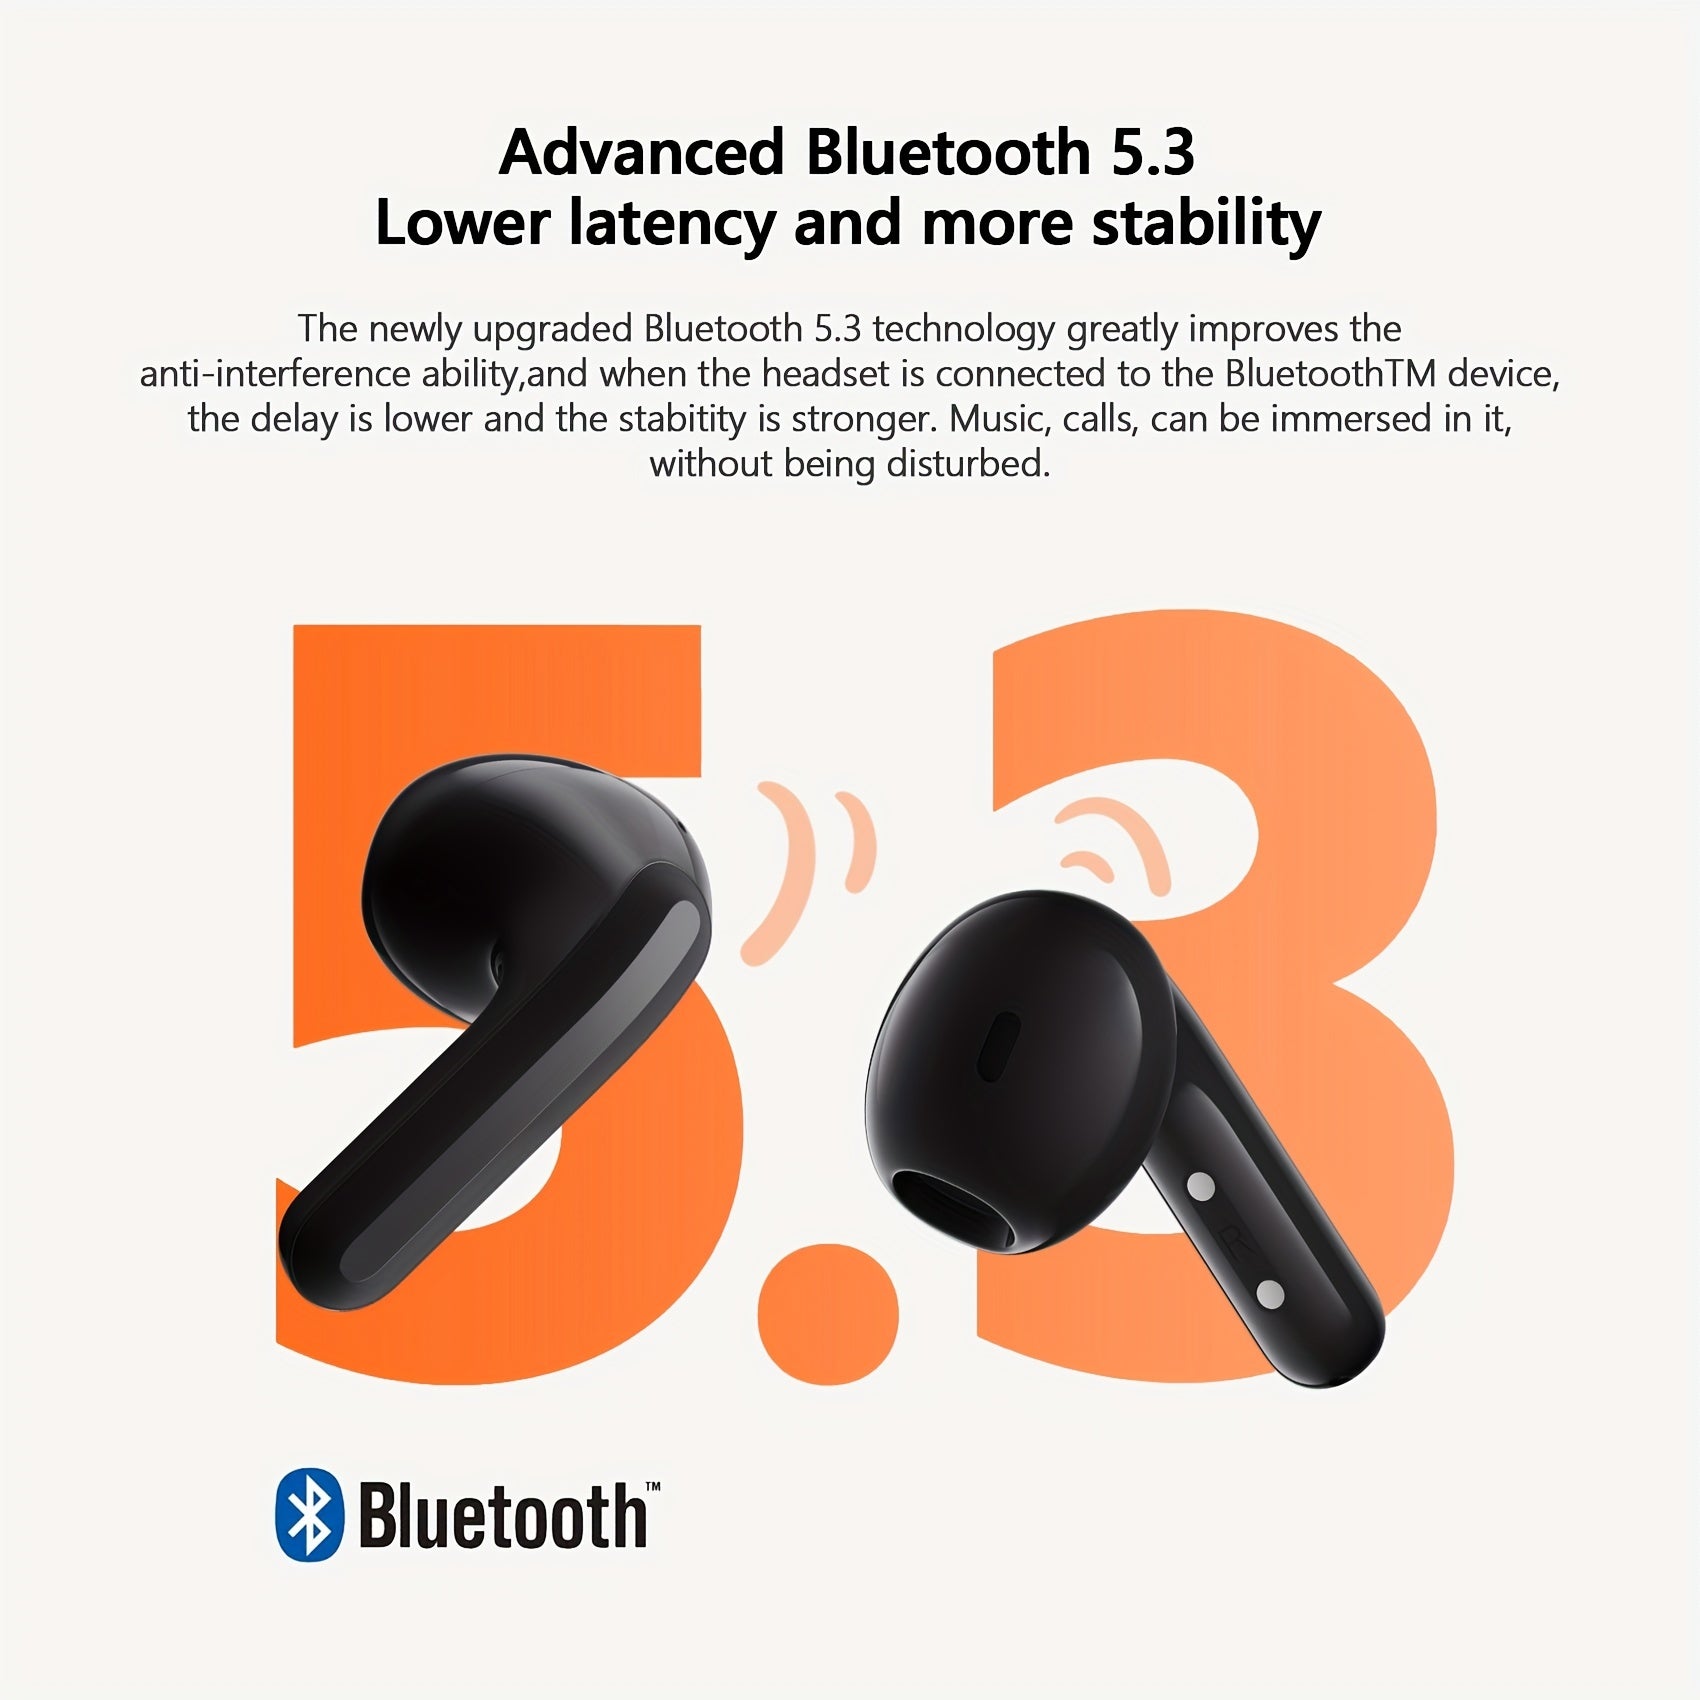 Xiaomi Redmi Buds 4 Lite TWS Wireless Earbuds, 5.3 Low-Latency Game Headset With AI Call Noise Cancelling, IP54 Waterproof, 20H Playtime, Lightweight Comfort Fit Headphones